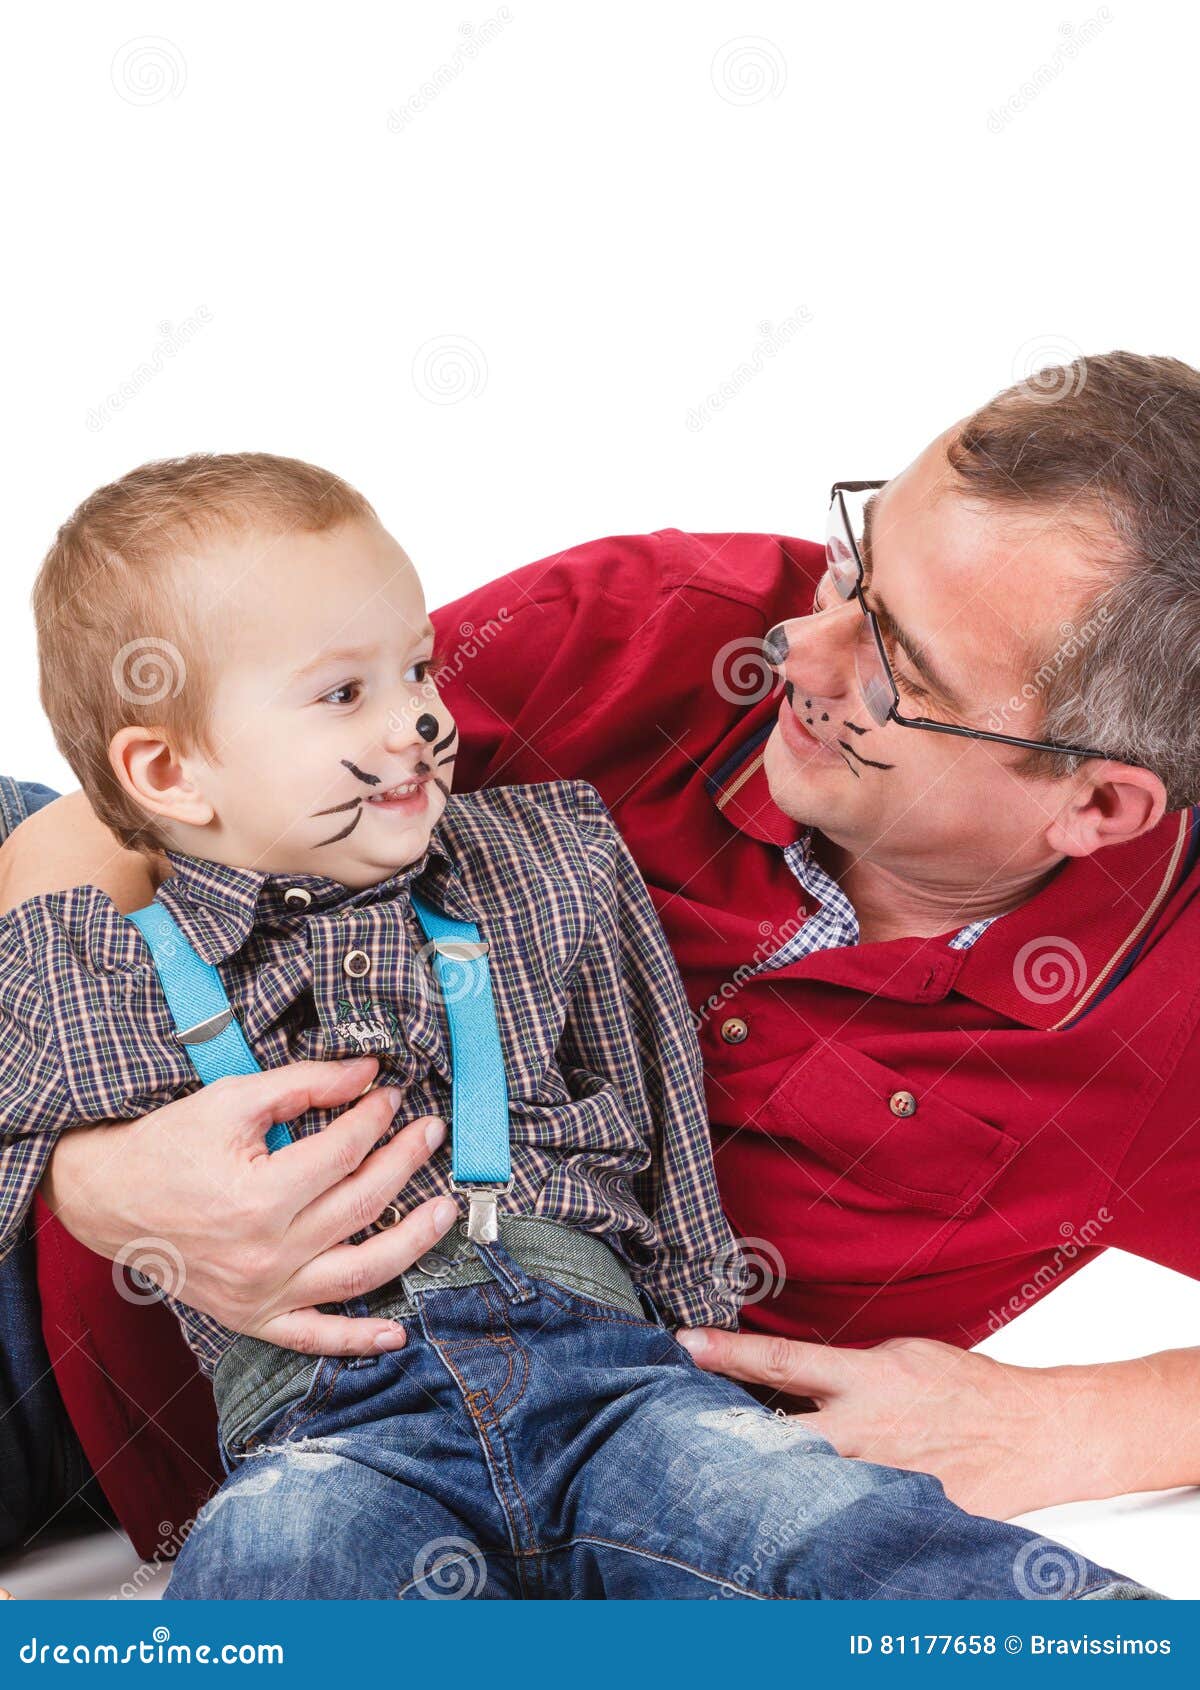 Father And Son Kid With Cat Makeup. Humor, Fun, Happy Childhood. Stock  Photo - Image Of Family, Childhood: 81177658